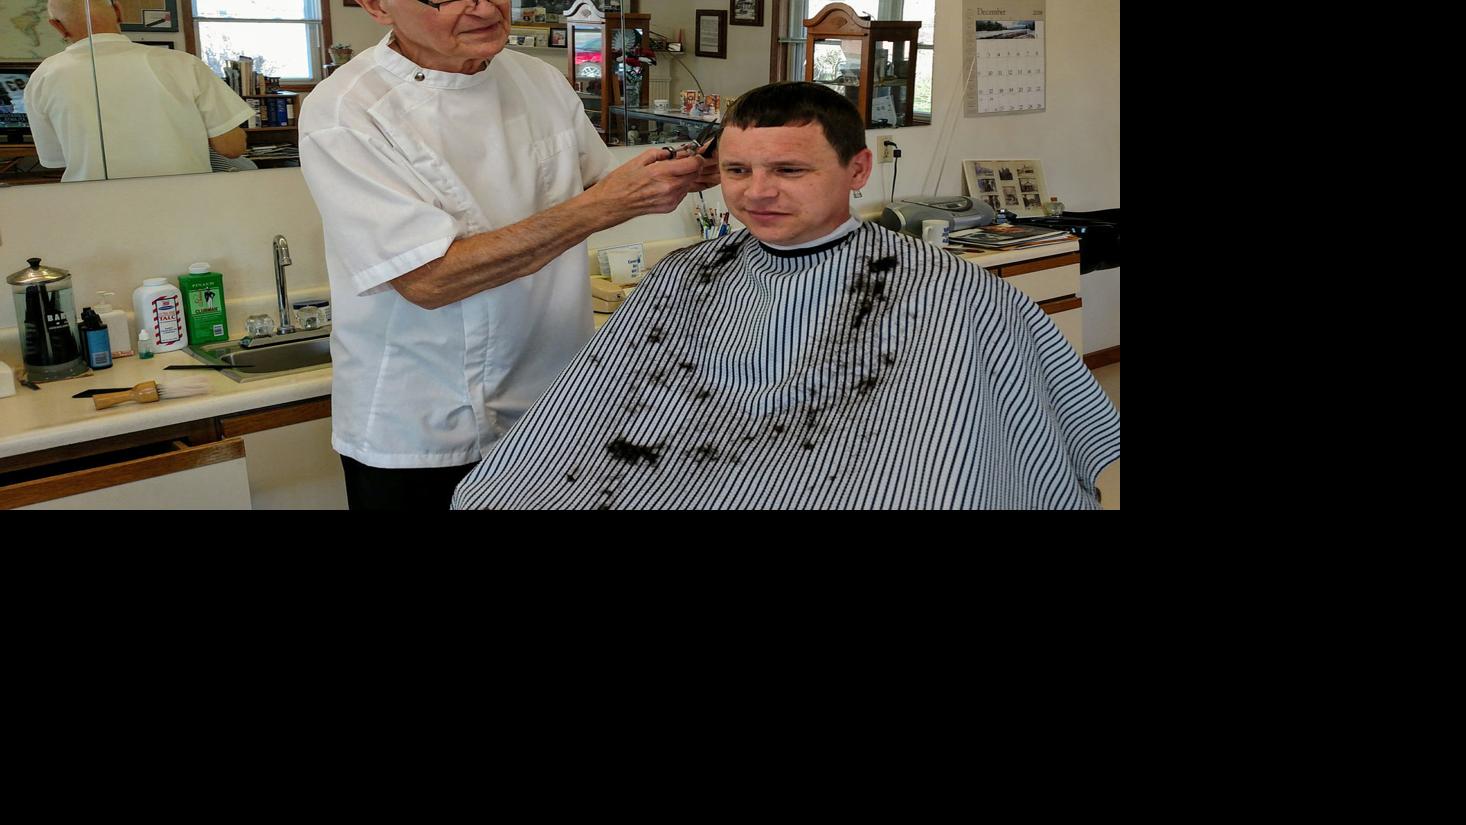 Barber On The Cutting Edge State And Regional Pantagraph Com